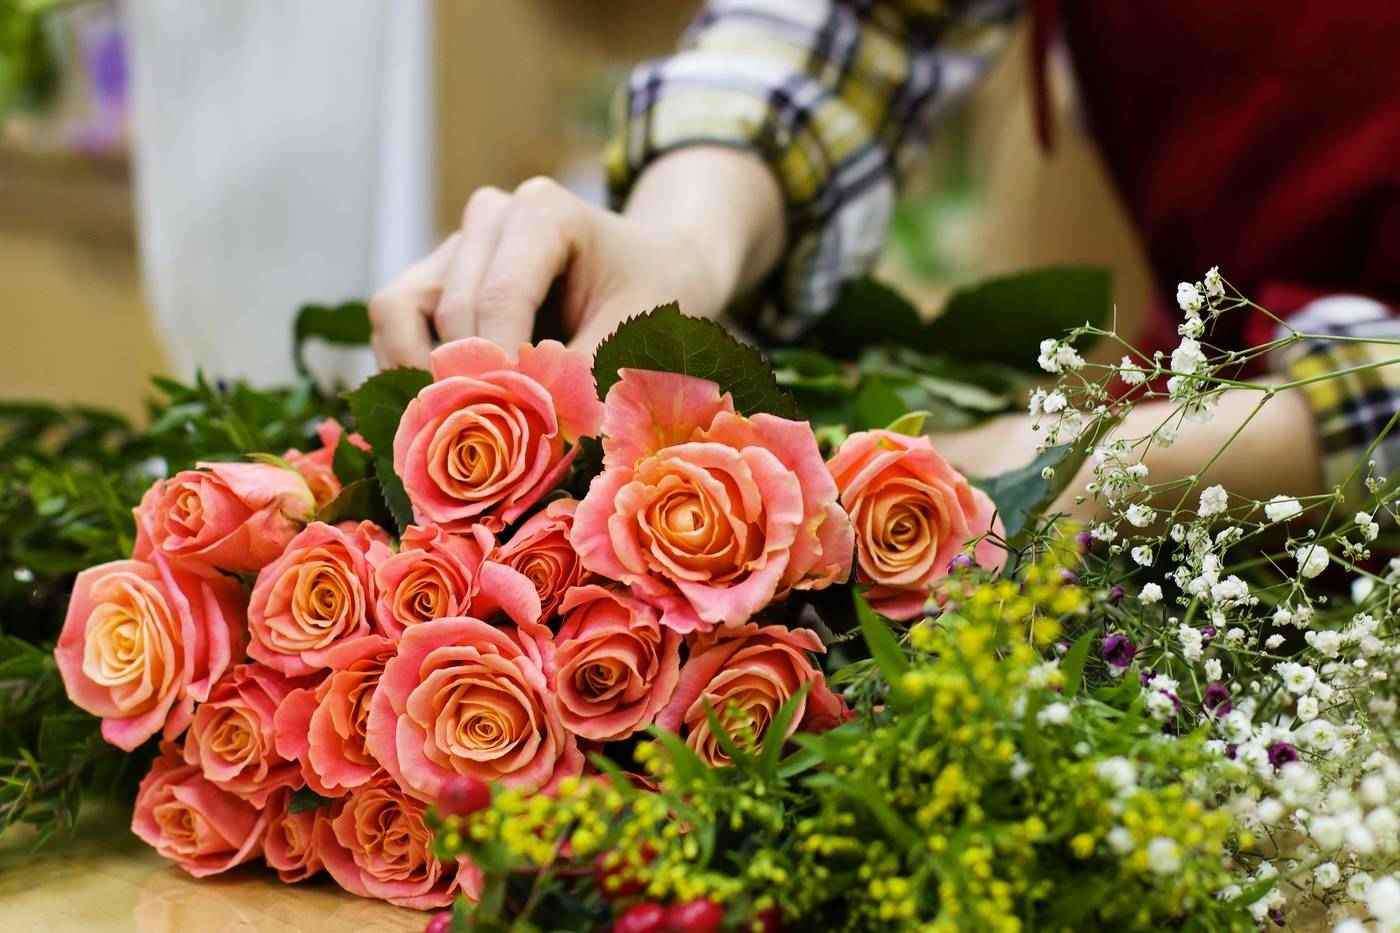 Person working with flowers